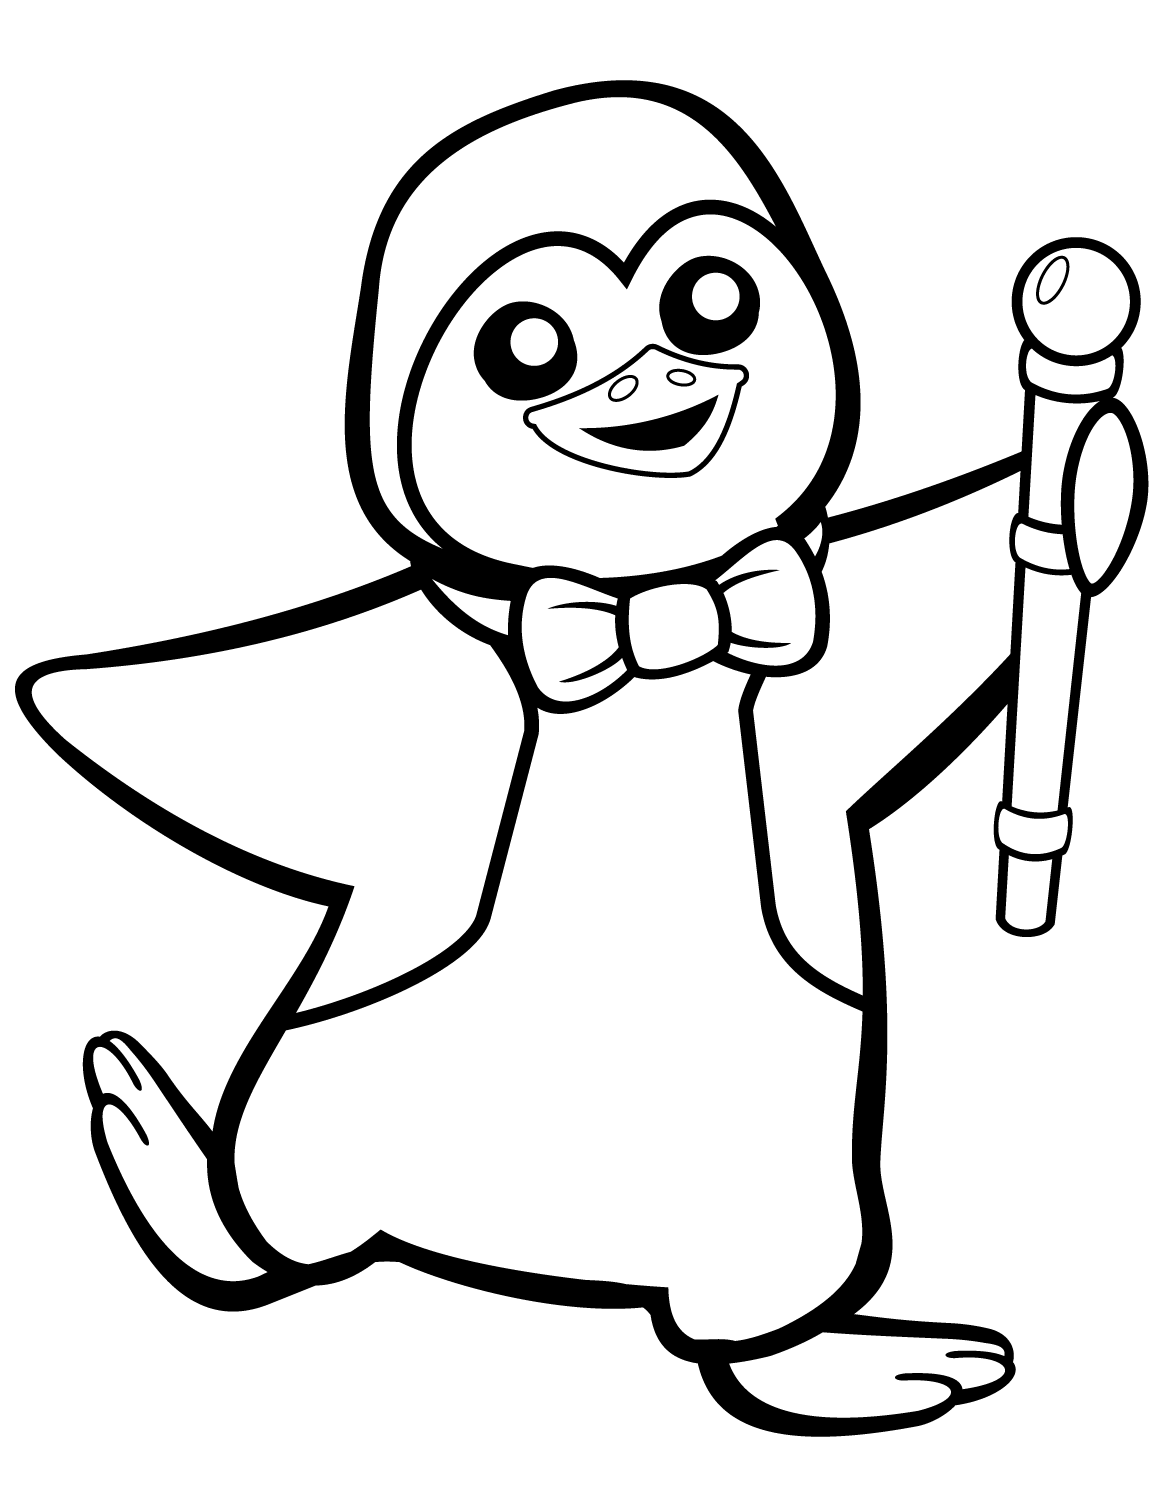 Funny Penguin With Bow Tie